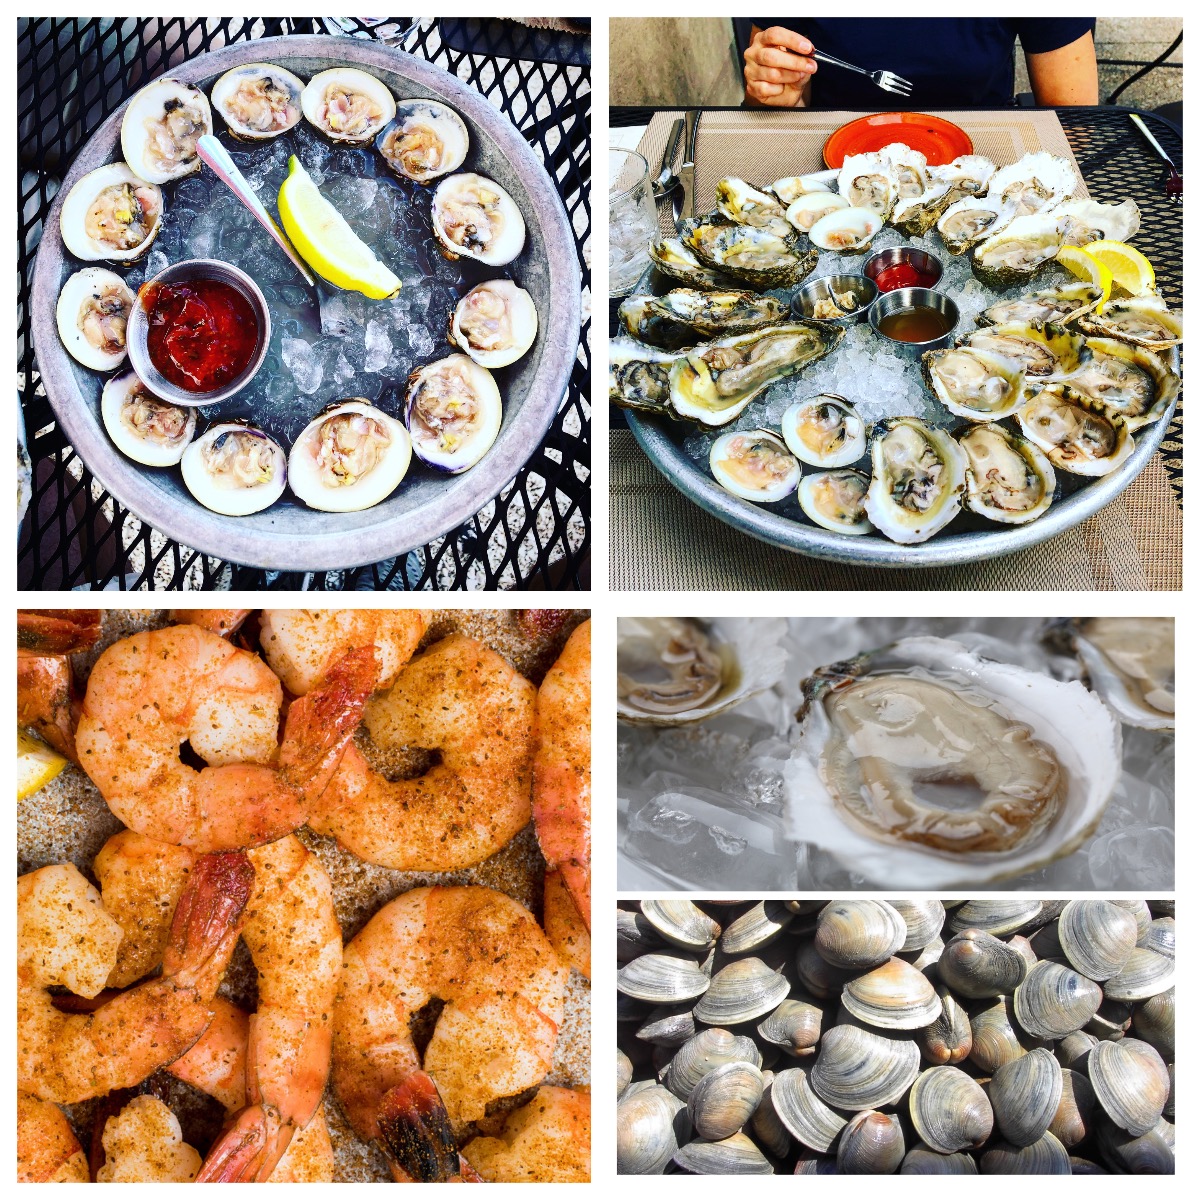 Buy Fresh Shellfish Online – Clams, Mussels, Oysters, and Tools